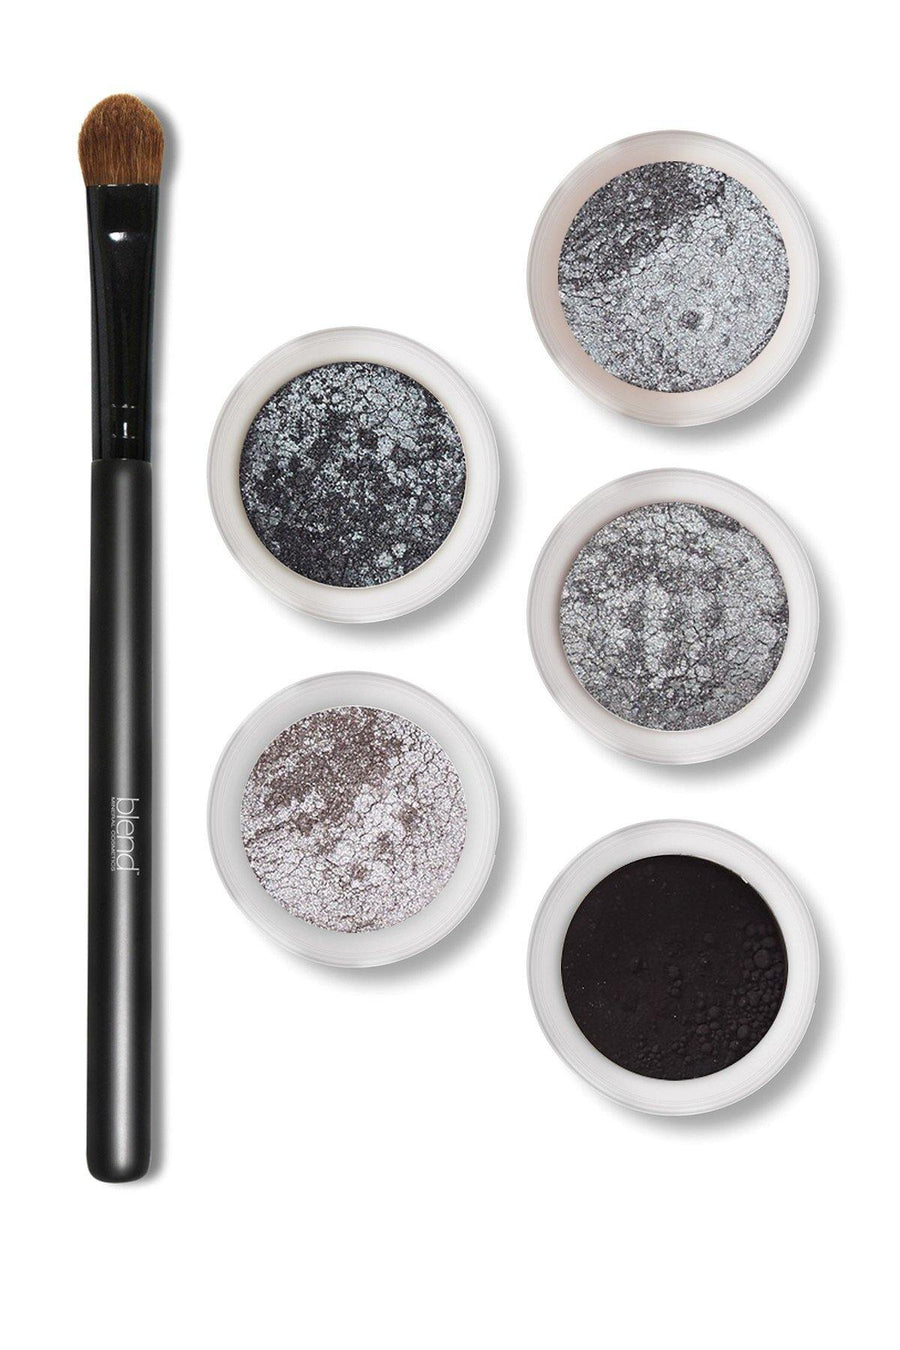 Fifty Shades of Grey Shimmer Powder 6-Piece Set - Blend Mineral Cosmetics